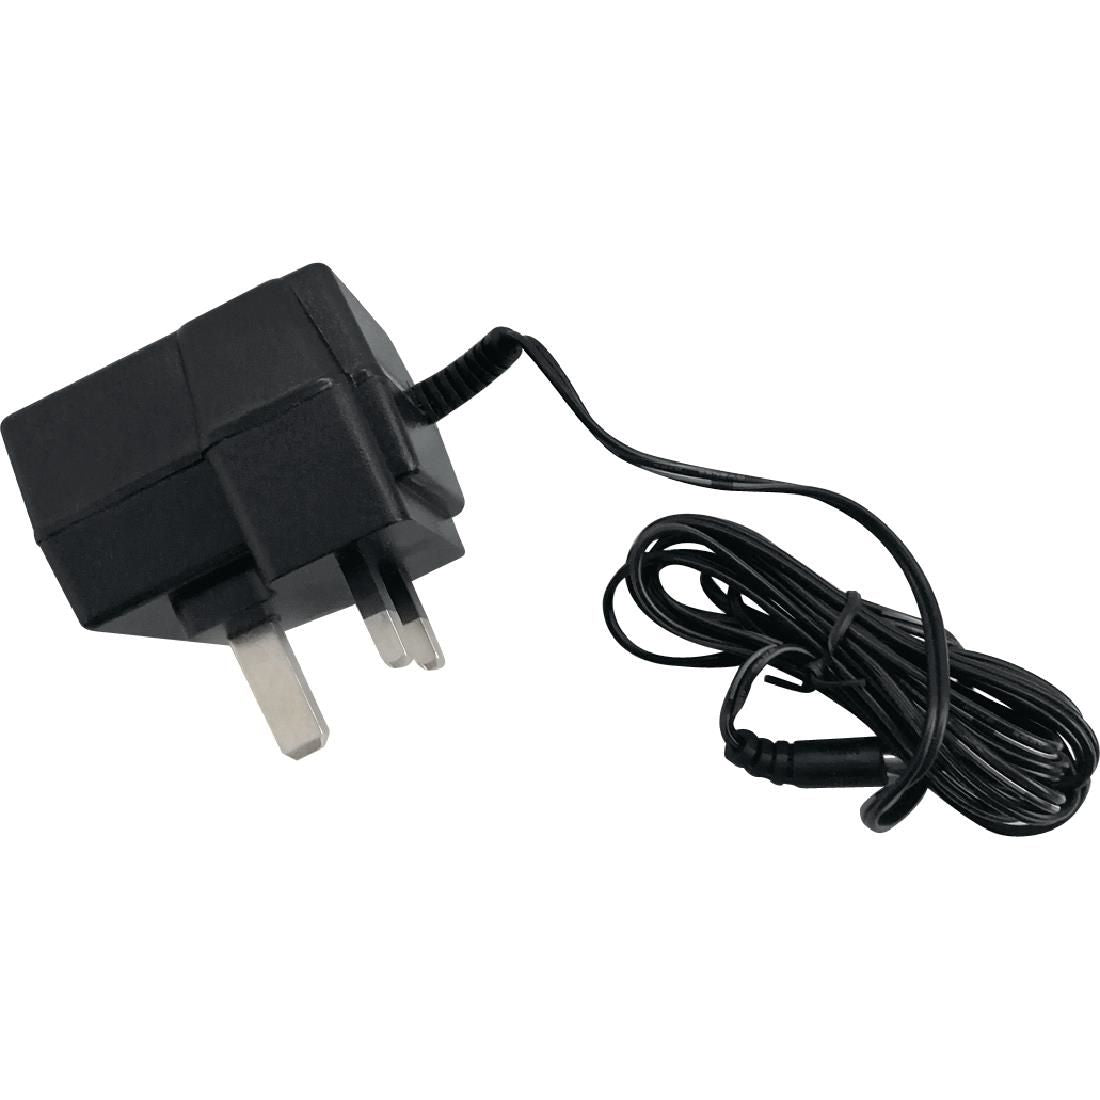 AC861 Power Adapter for Weighstation Scales CD564 JD Catering Equipment Solutions Ltd